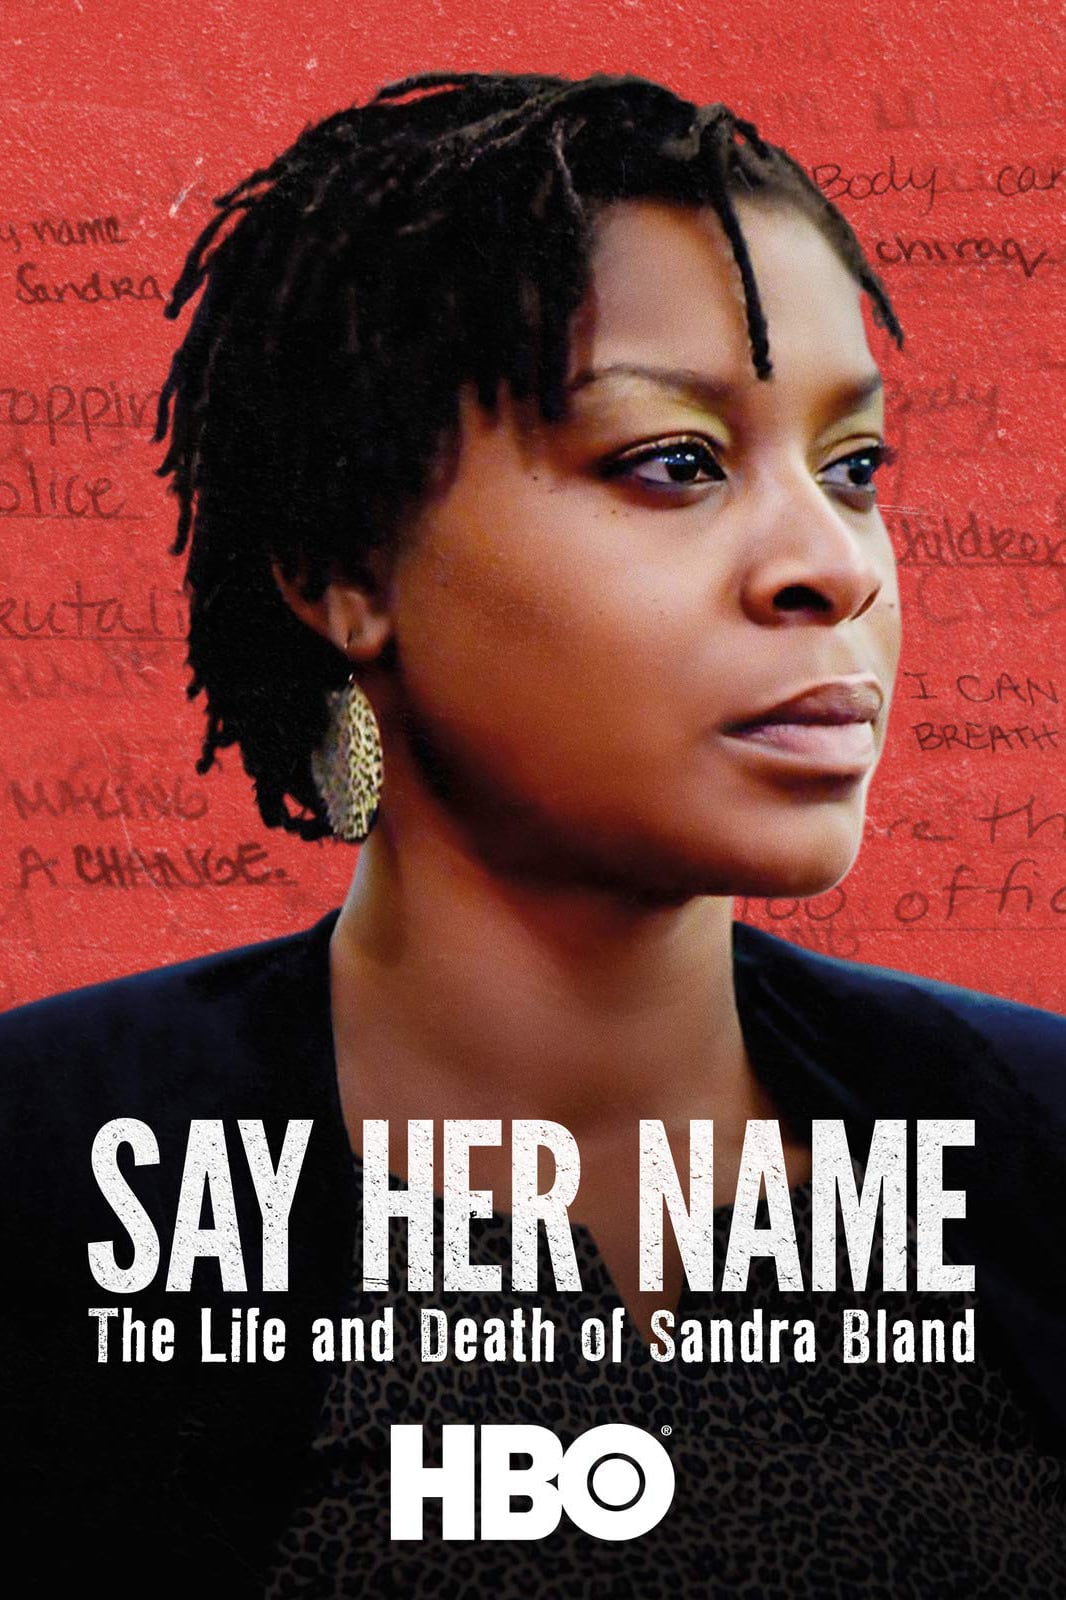 SAY HER NAME THE LIFE AND DEATH OF SANDRA BLAND